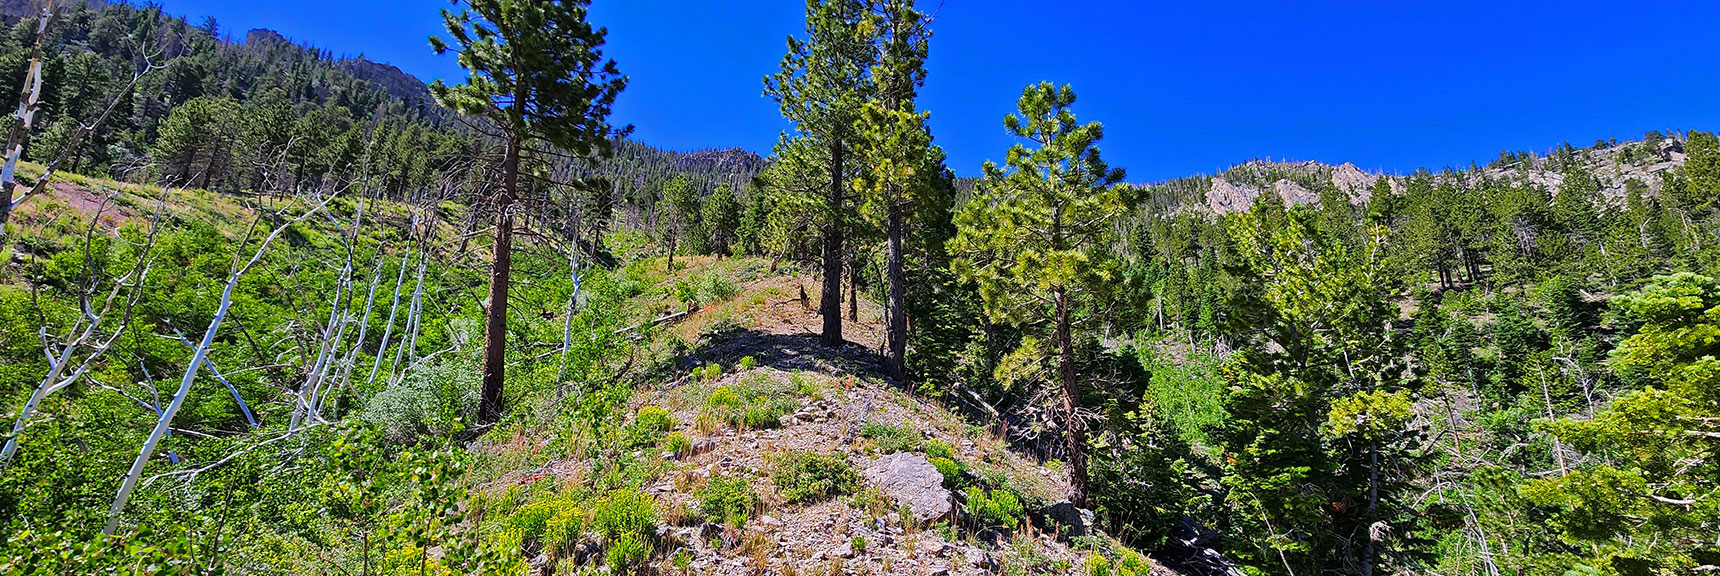 Continuing Up Ridge on Trail Through Pine Forest. Deep Gullies on Either Side Help Keep You On Course. | Fletcher View Ridge | Mt Charleston Wilderness, Nevada